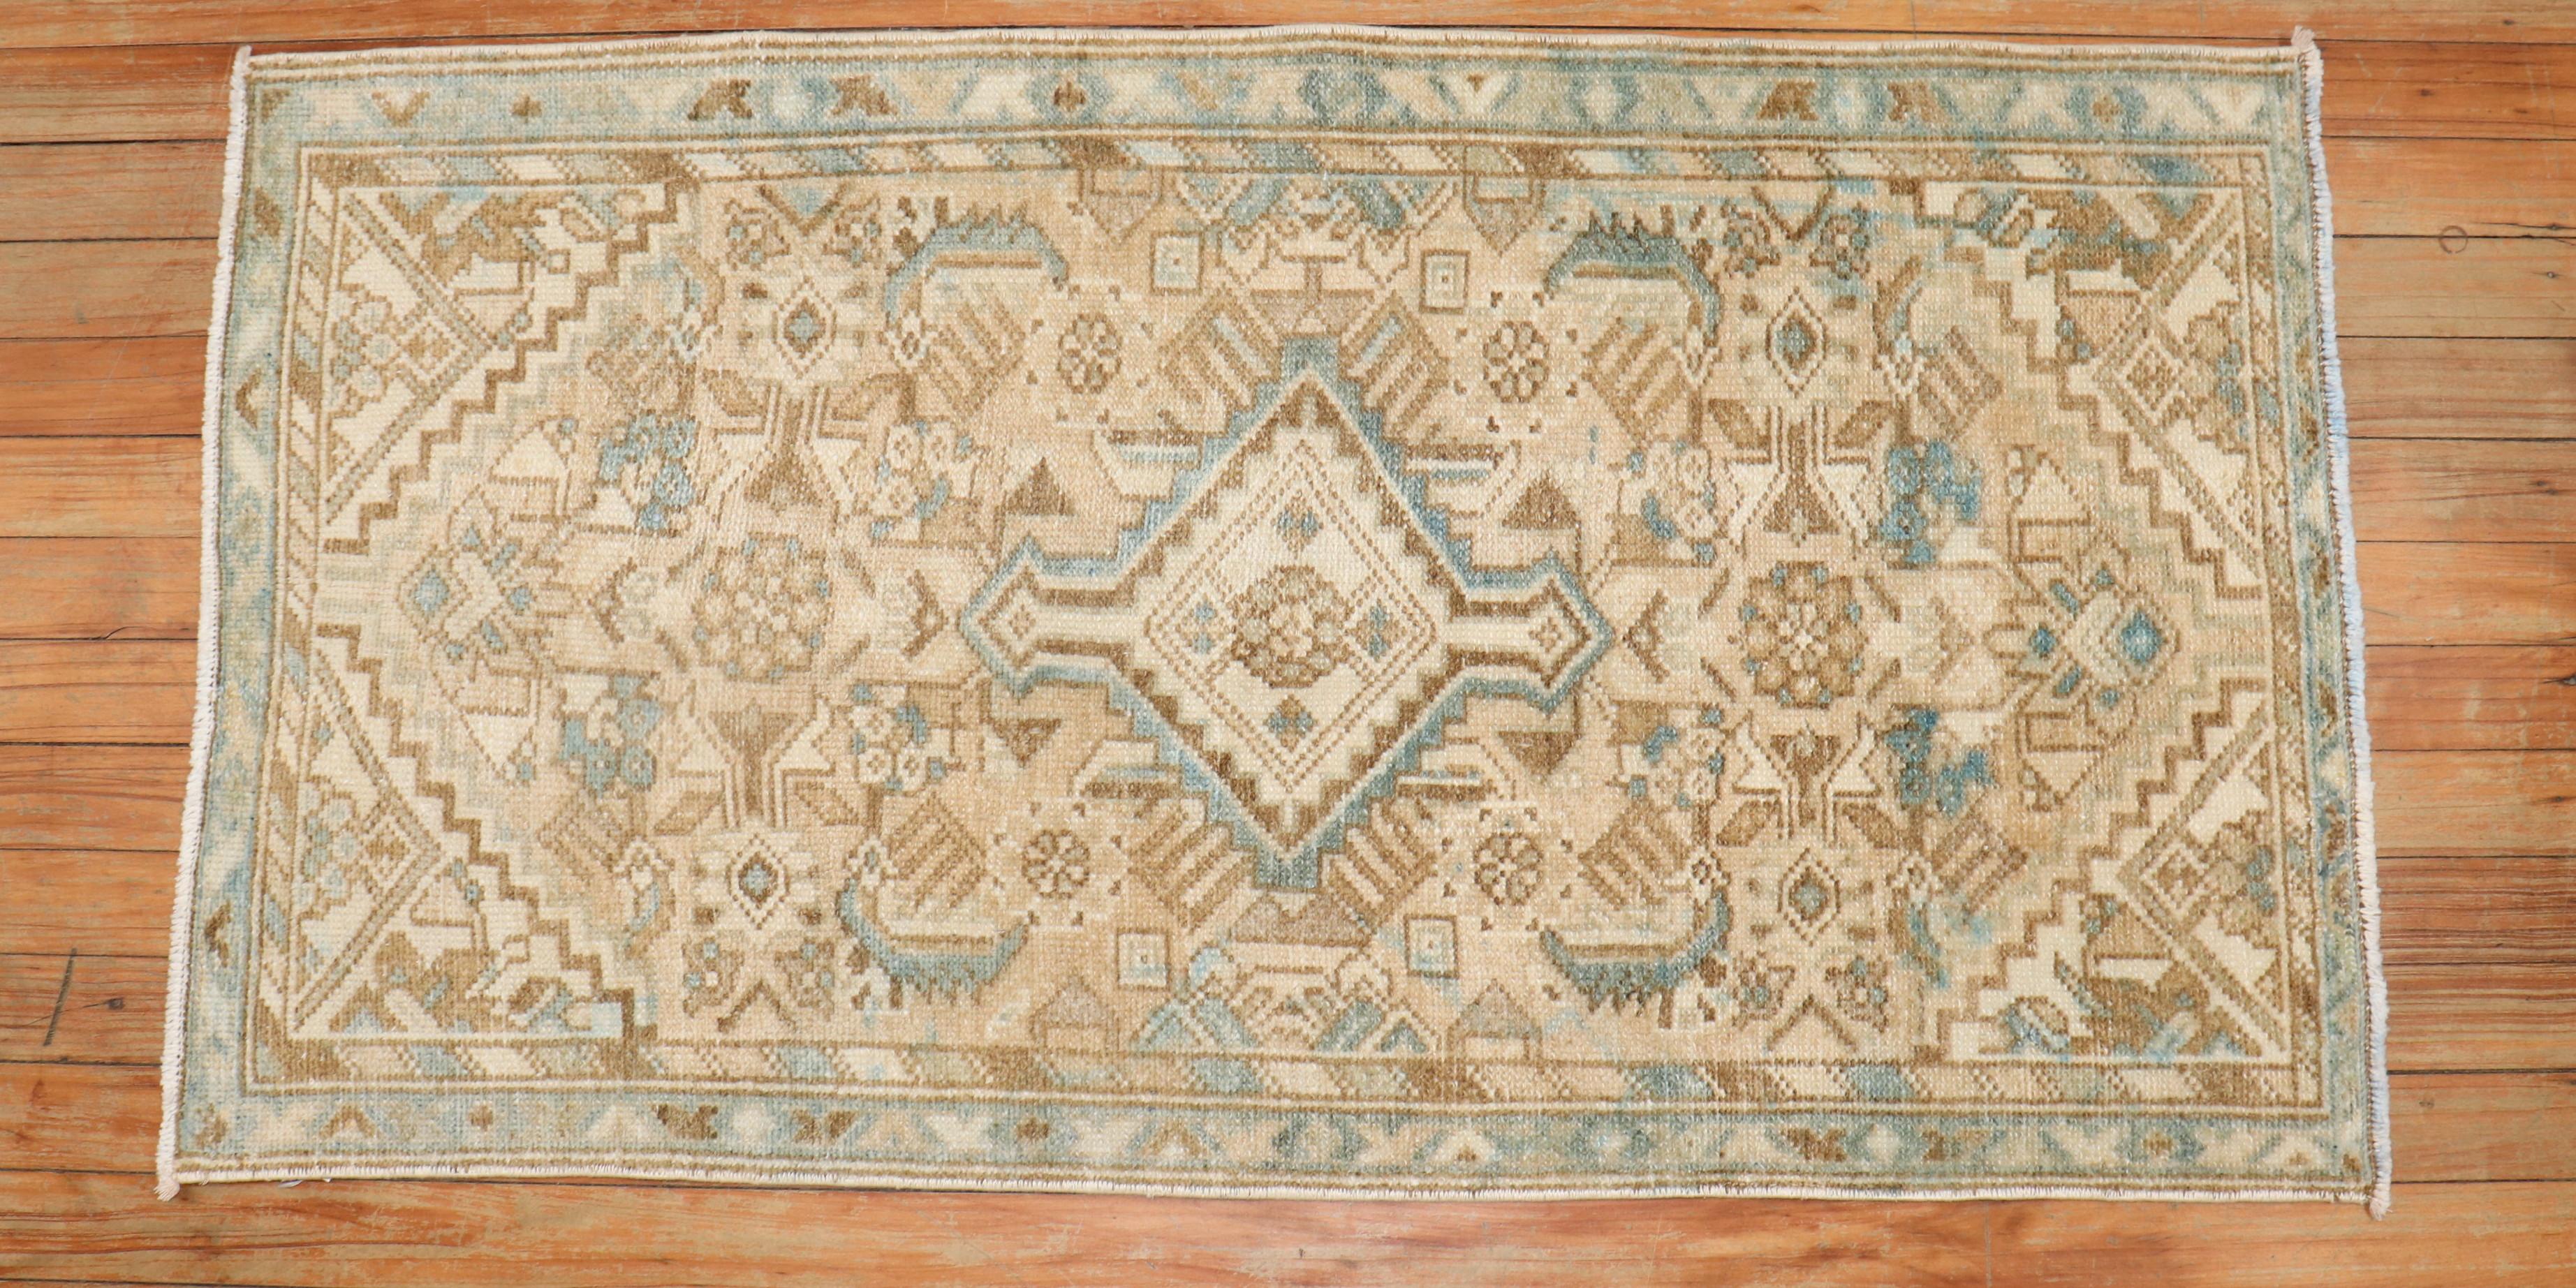 Mid 20th century Mini size Persian Heriz rug in neutral colors

Measures: 2'1'' x 3'10''.